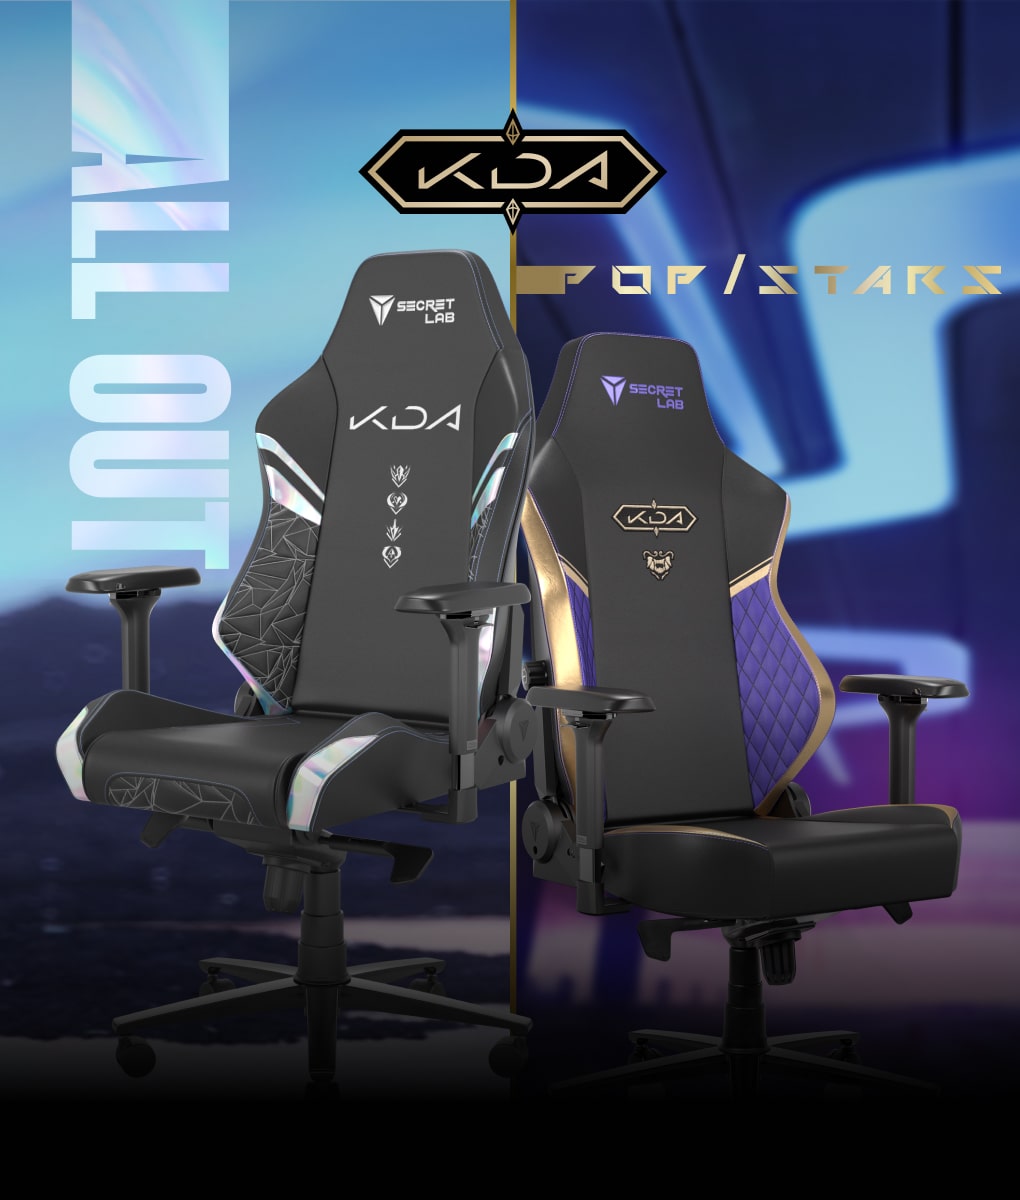 Secretlab K/DA ALL OUT and POP/STARS Special Edition Gaming Chairs